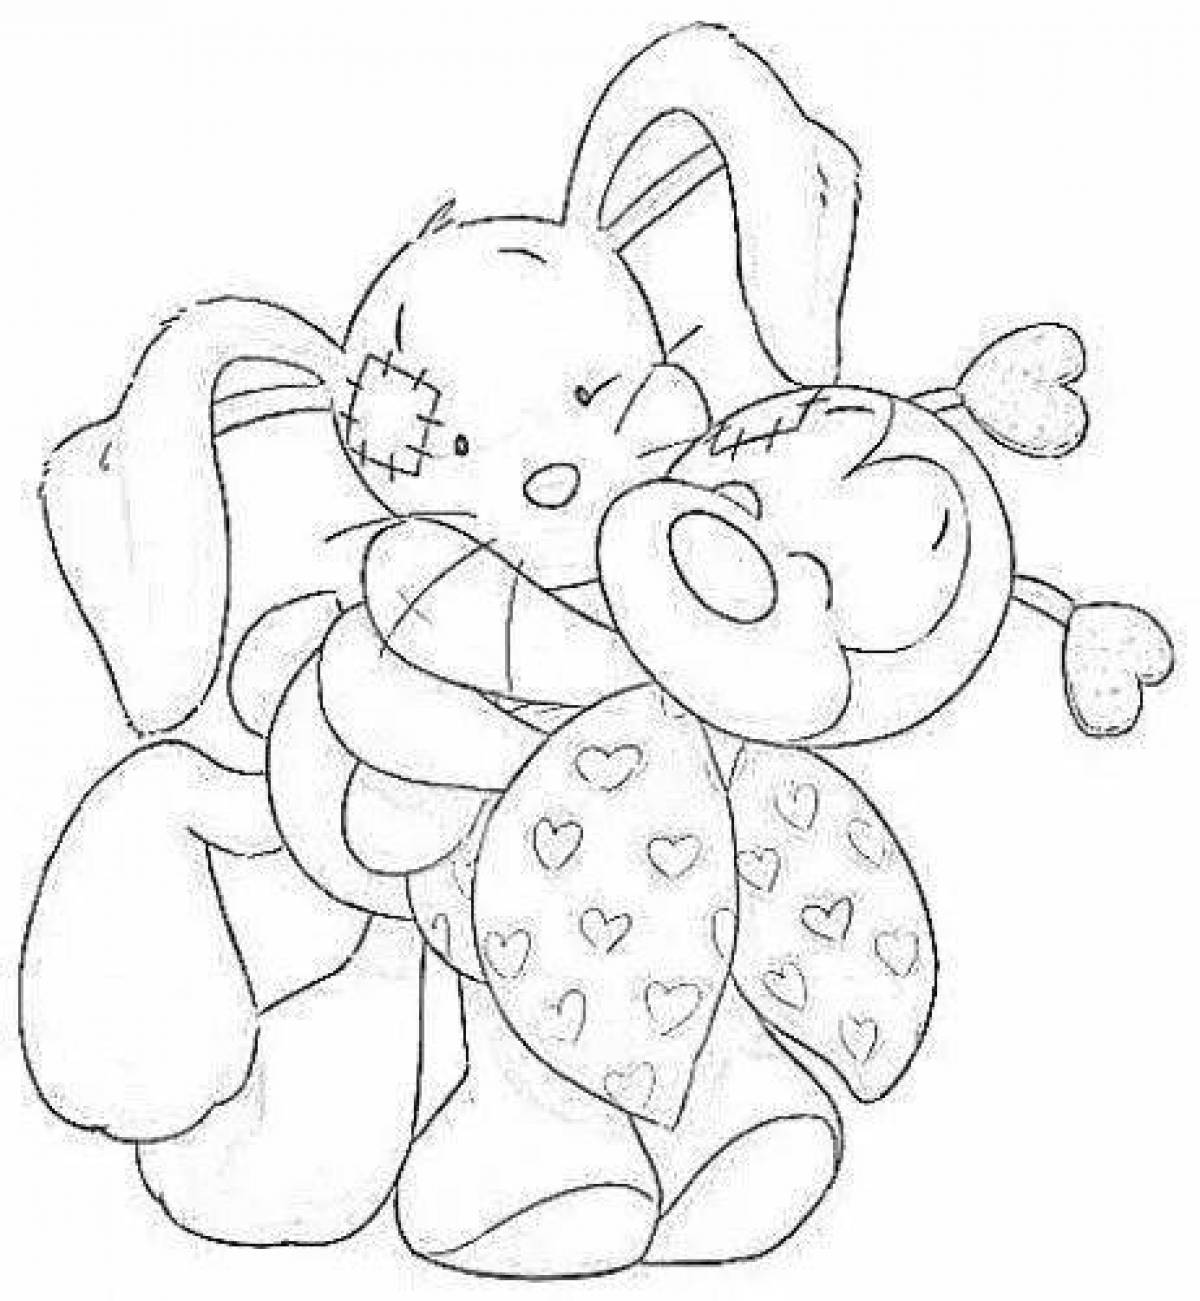 My bunny holiday coloring book